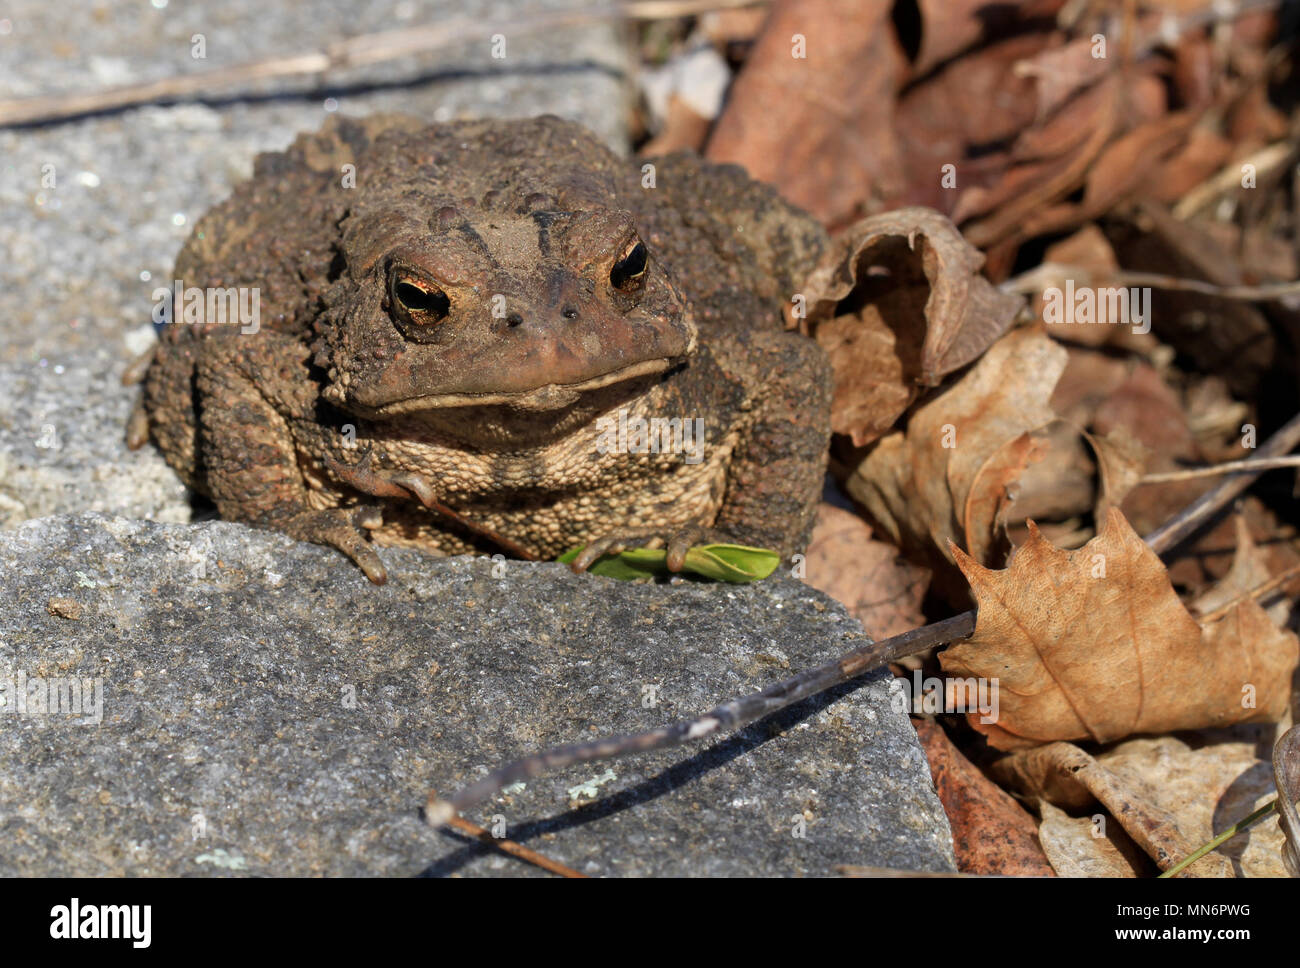 Close-up of a juvenile Fowler's toad (Anaxyrus fowleri) lounging on a garden stone beside leaf litter in spring Stock Photo